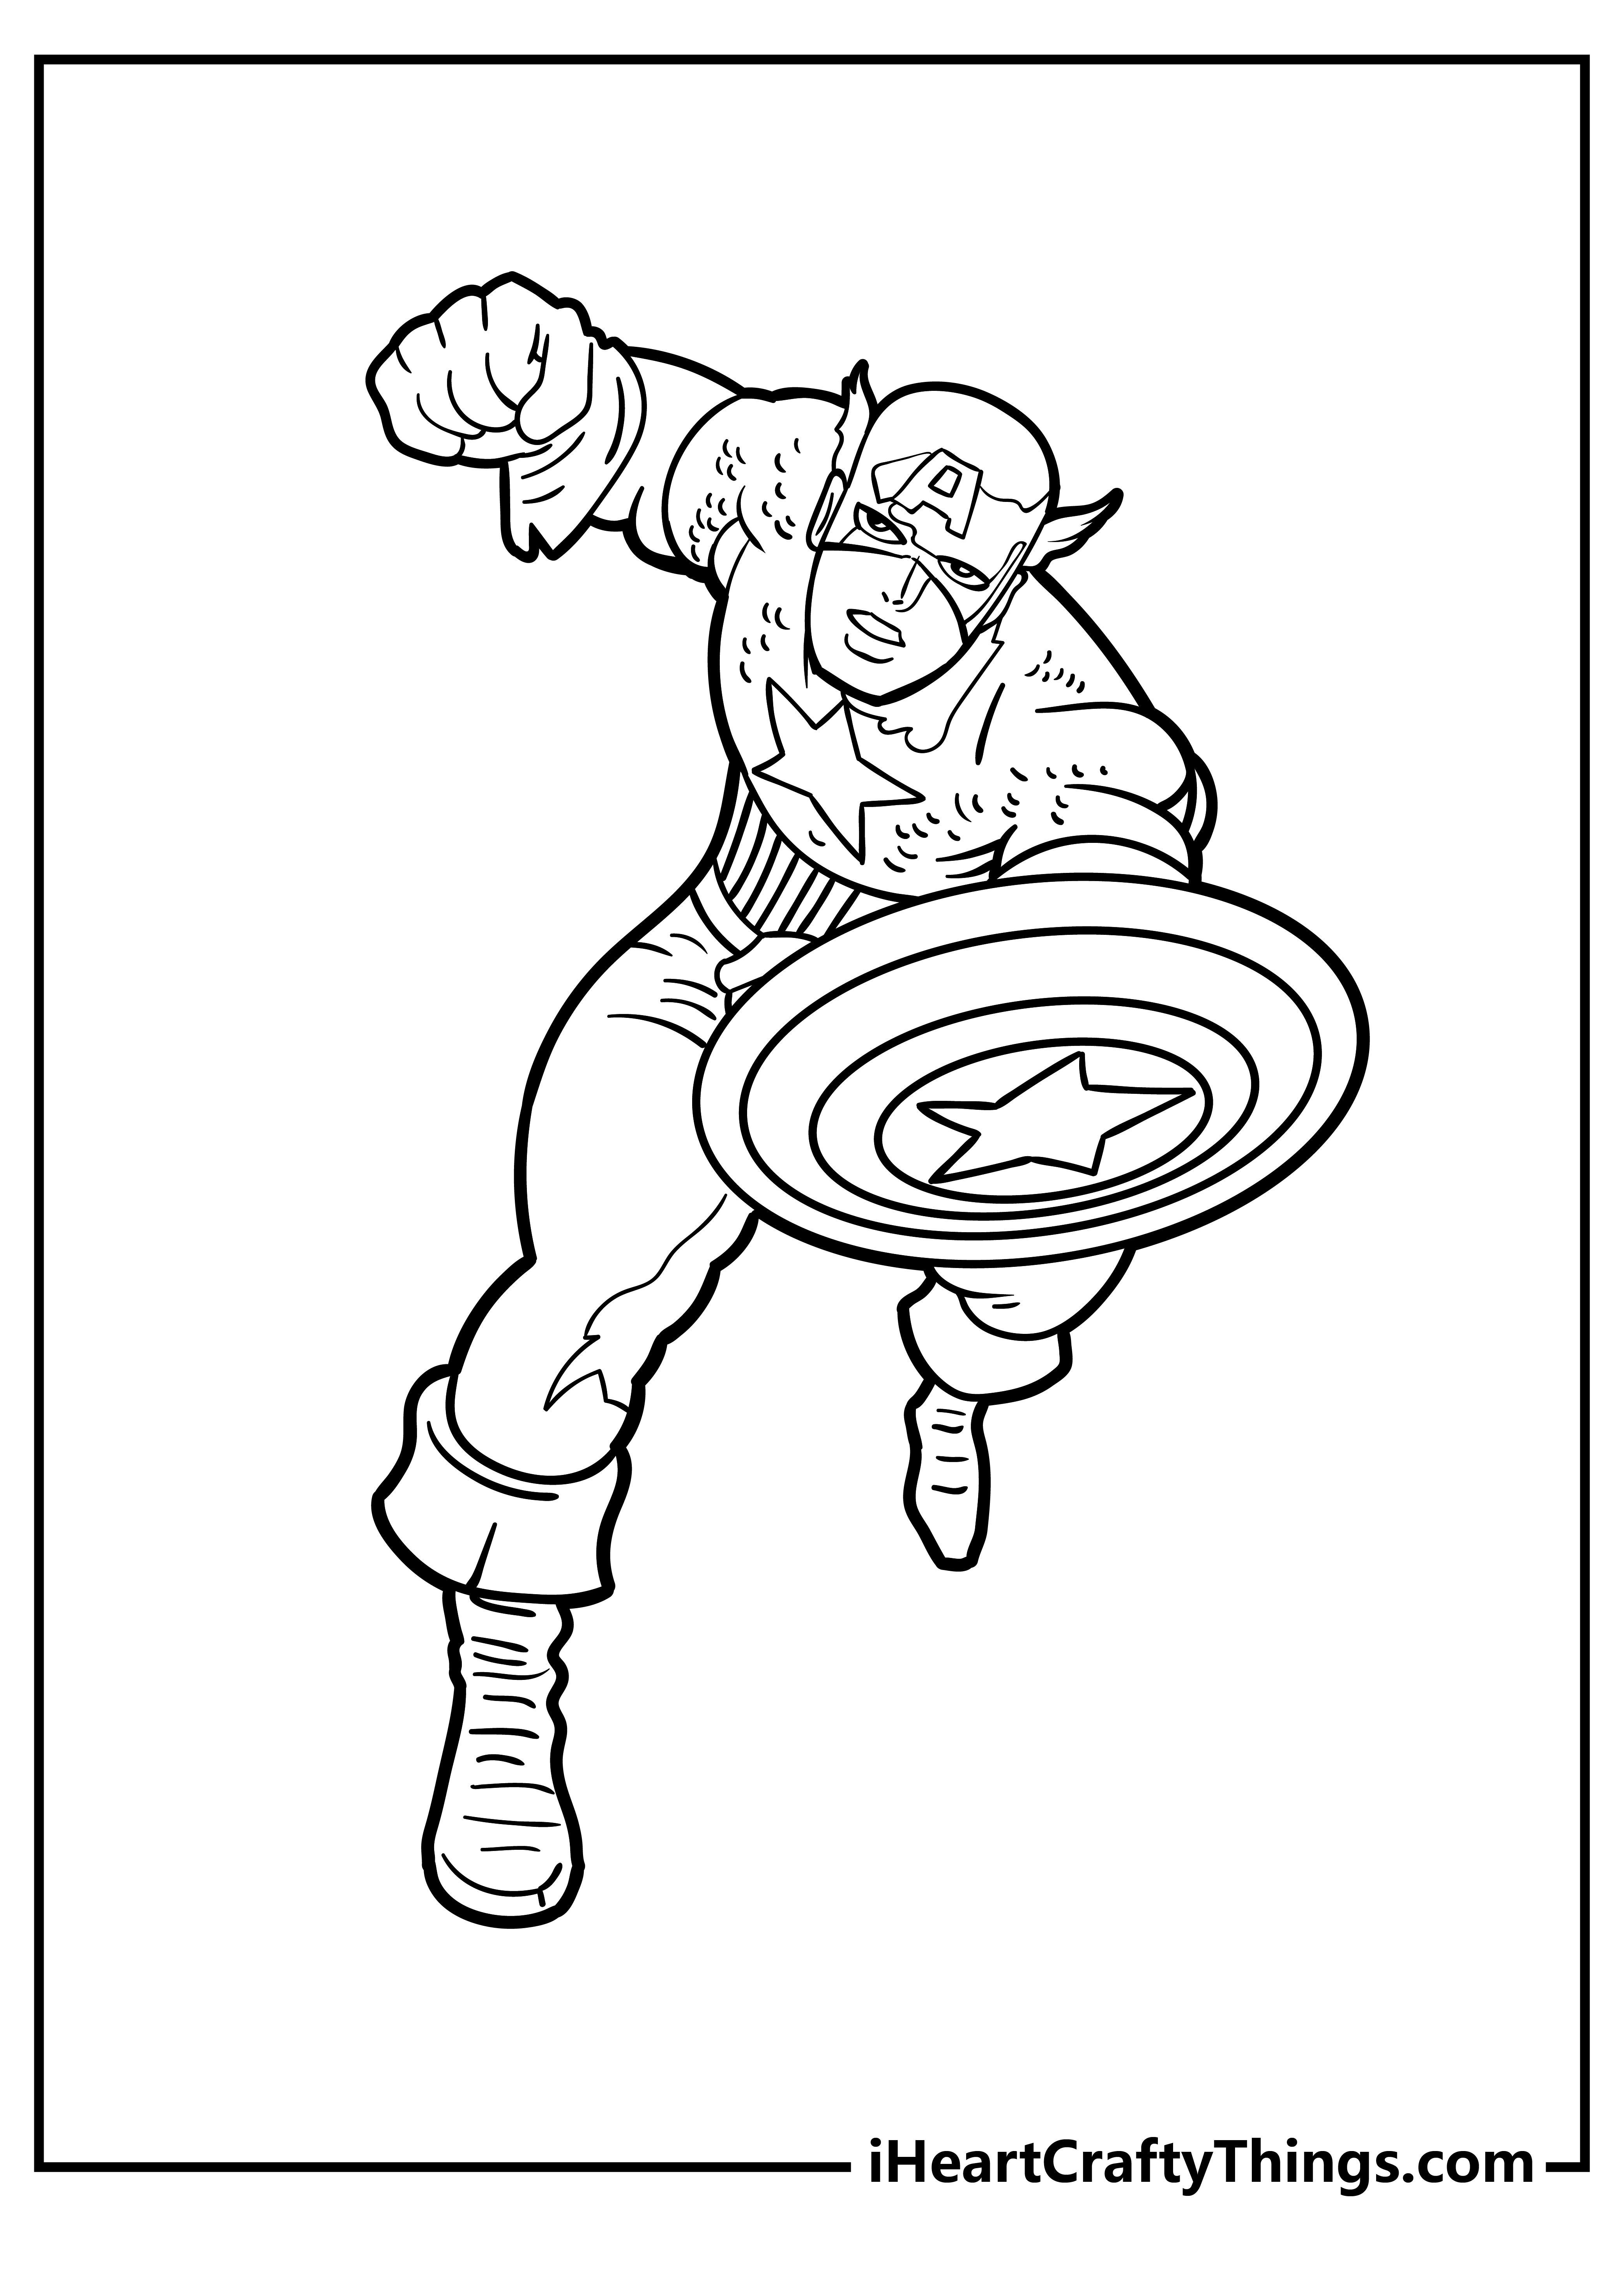 Captain America Coloring Pages for kids free download